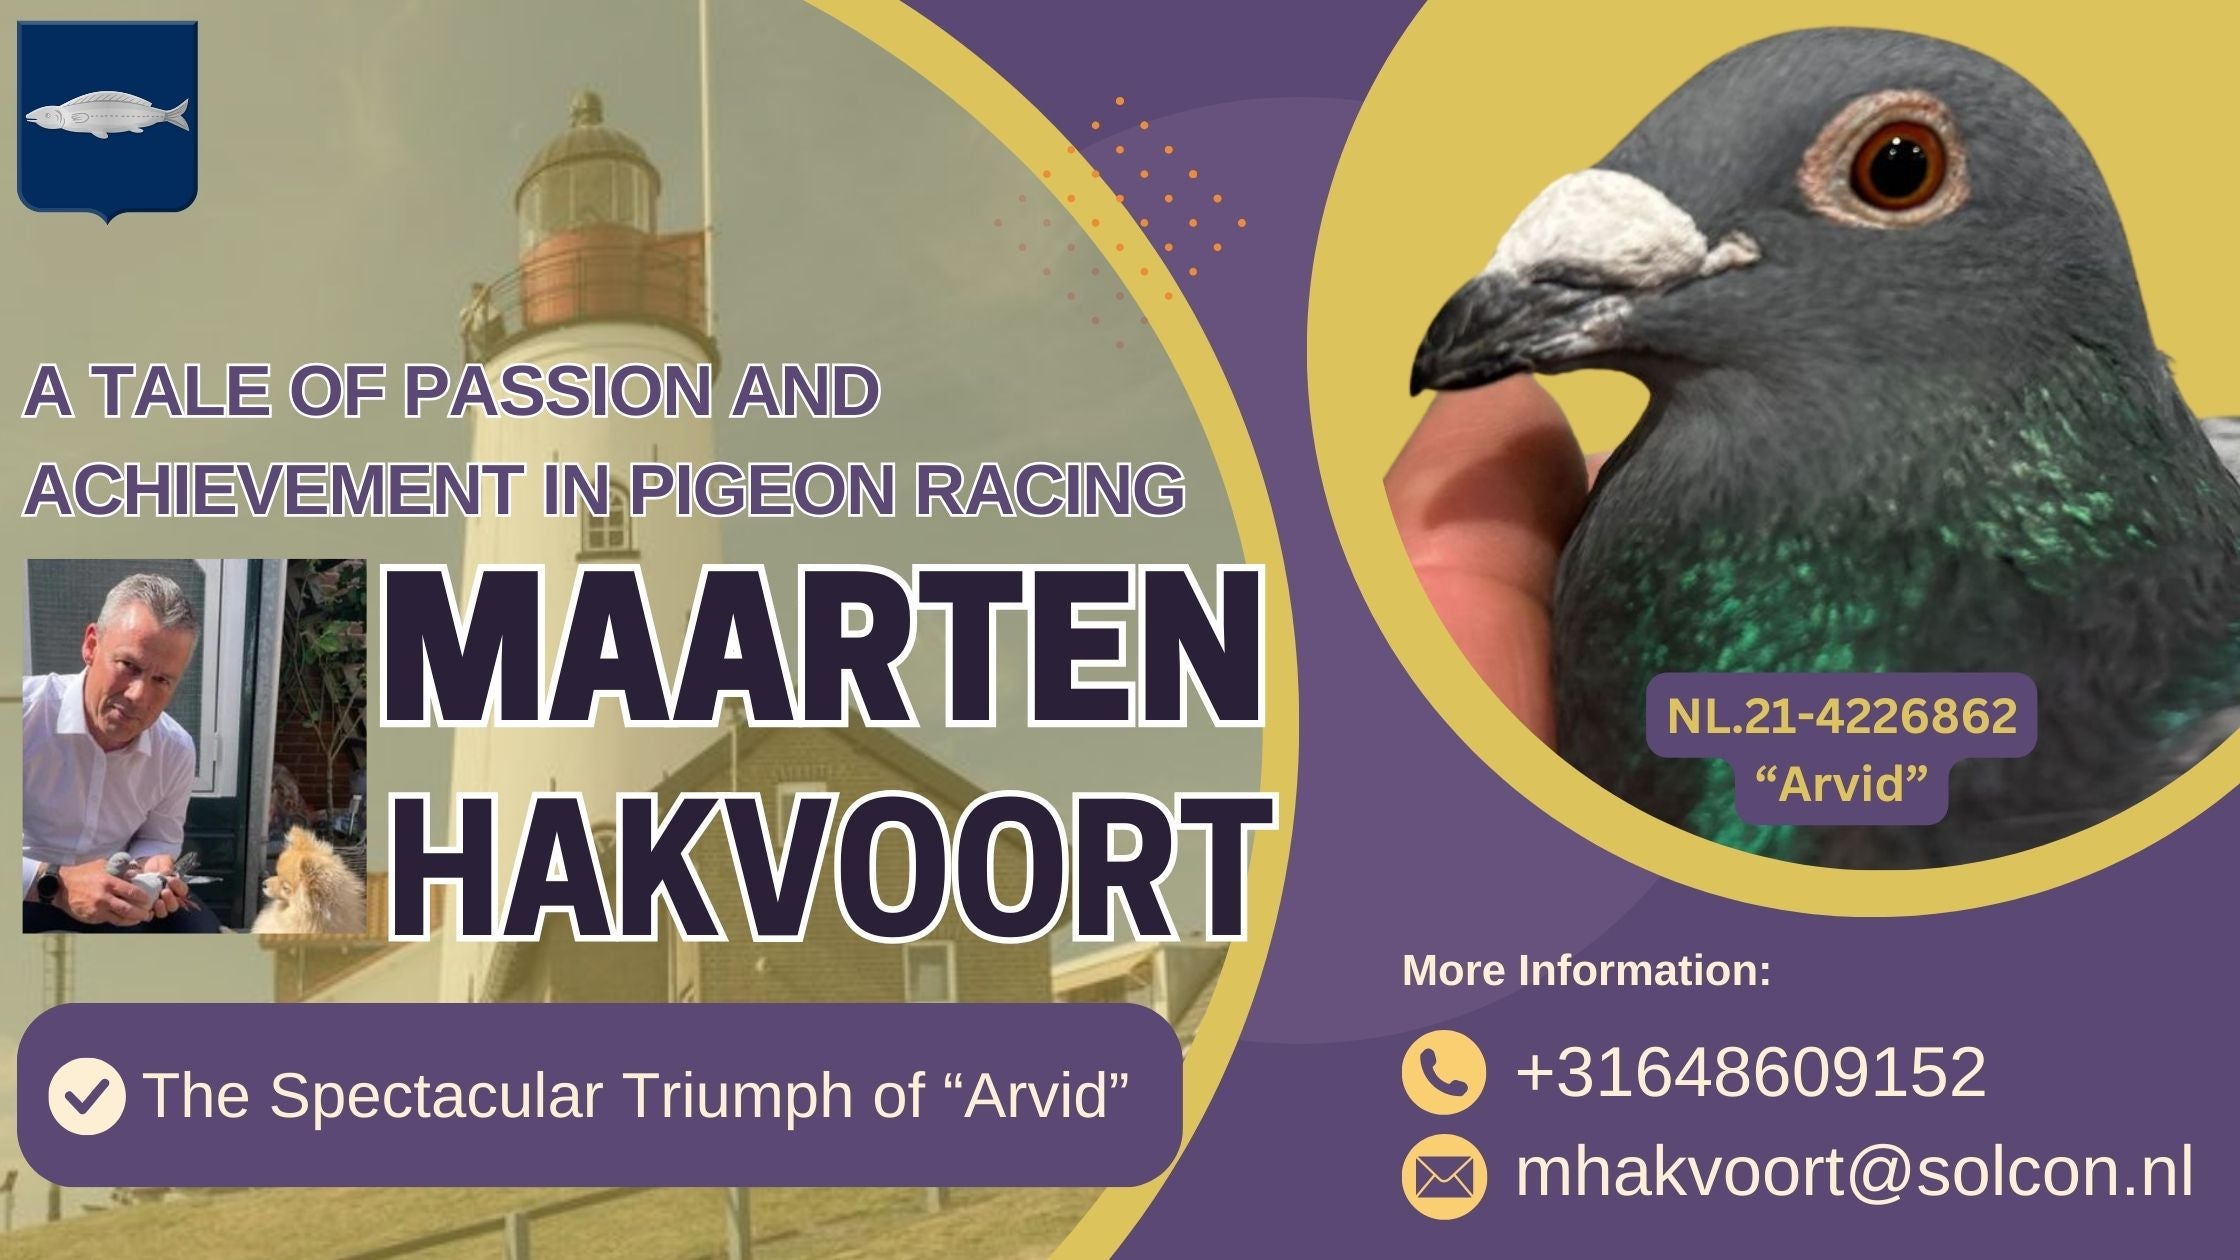 Maarten Hakvoort and the Spectacular Triumph of “Arvid”: A Tale of Passion and Achievement in Pigeon Racing